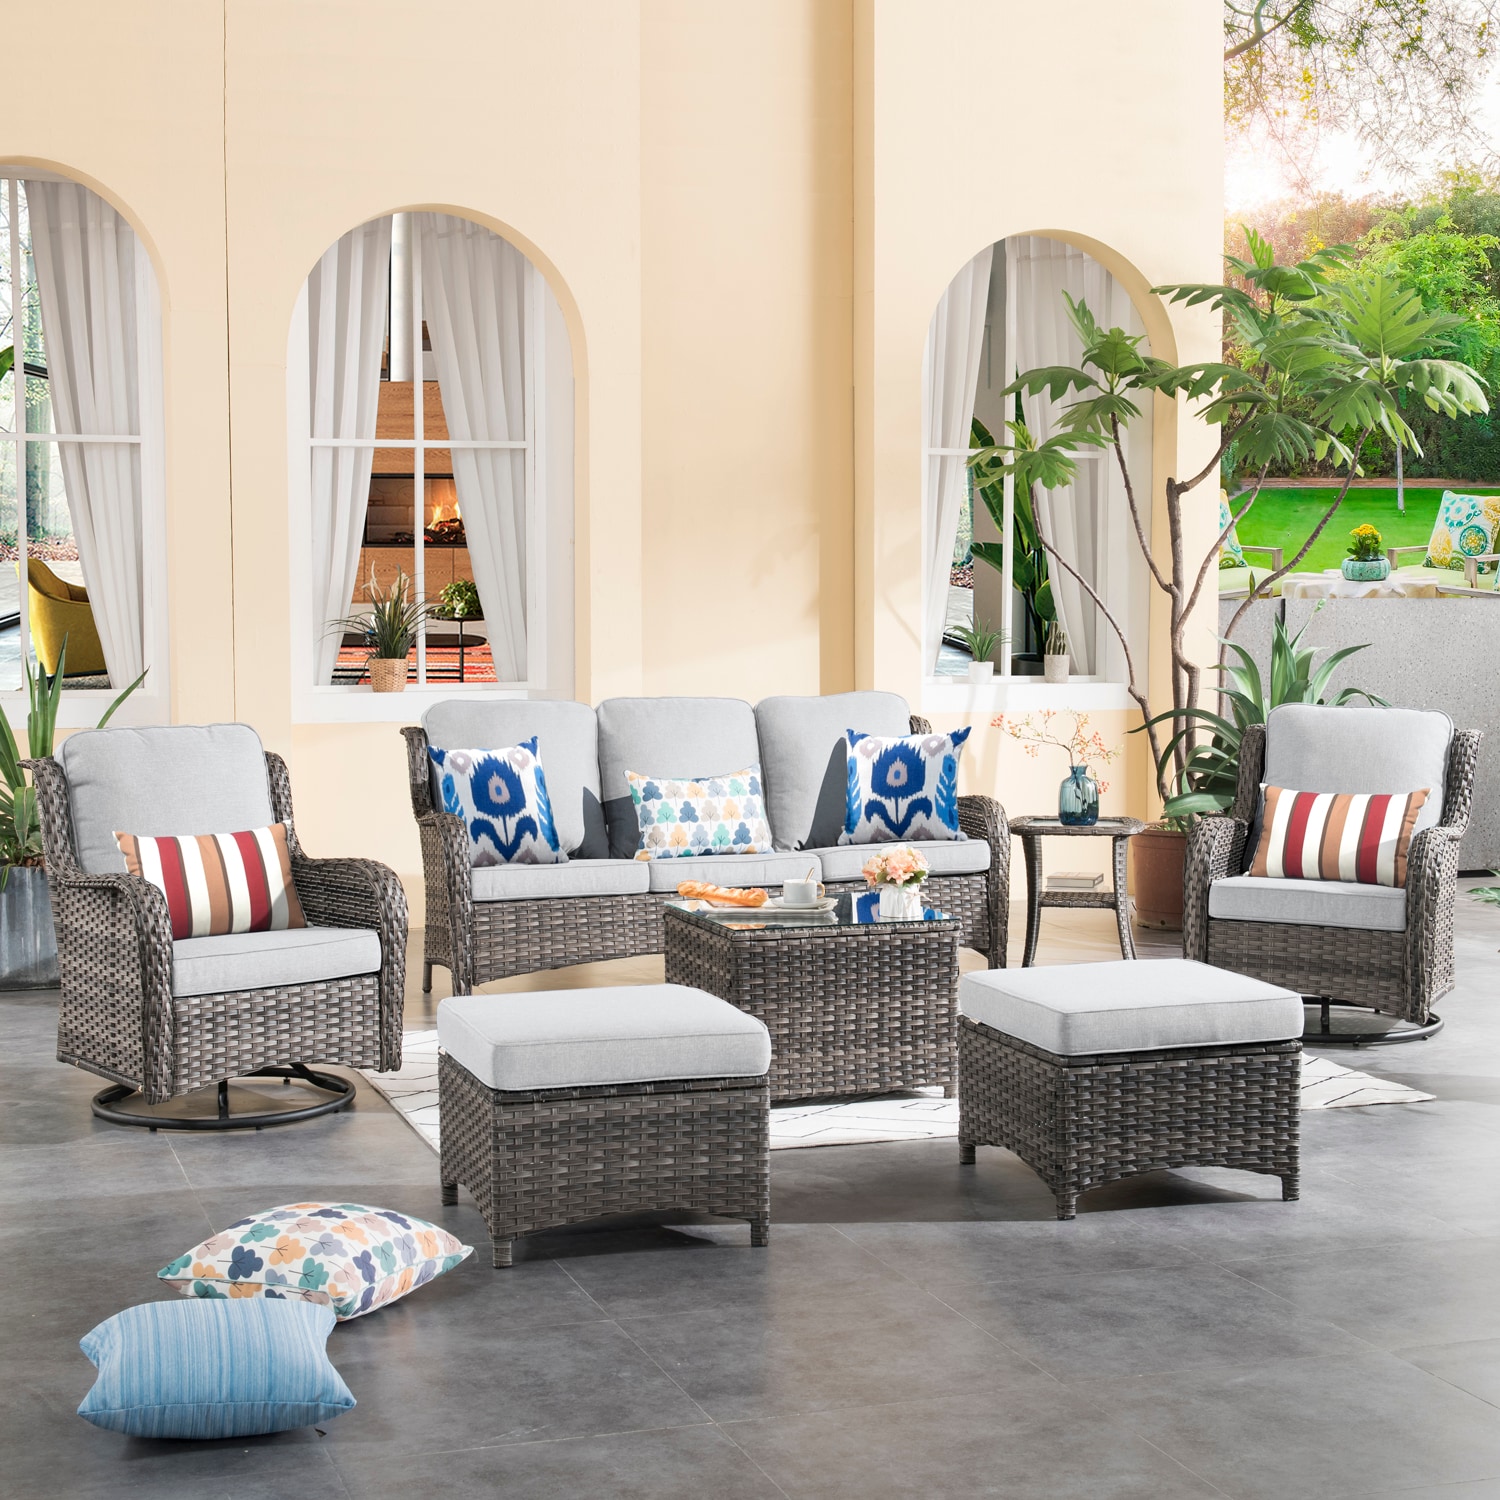 7 Piece Rattan Sectional Sofa Set, Outdoor Conversation Set, All-Weather  Wicker Sectional Seating Group with Cushions & Coffee Table, Morden  Furniture